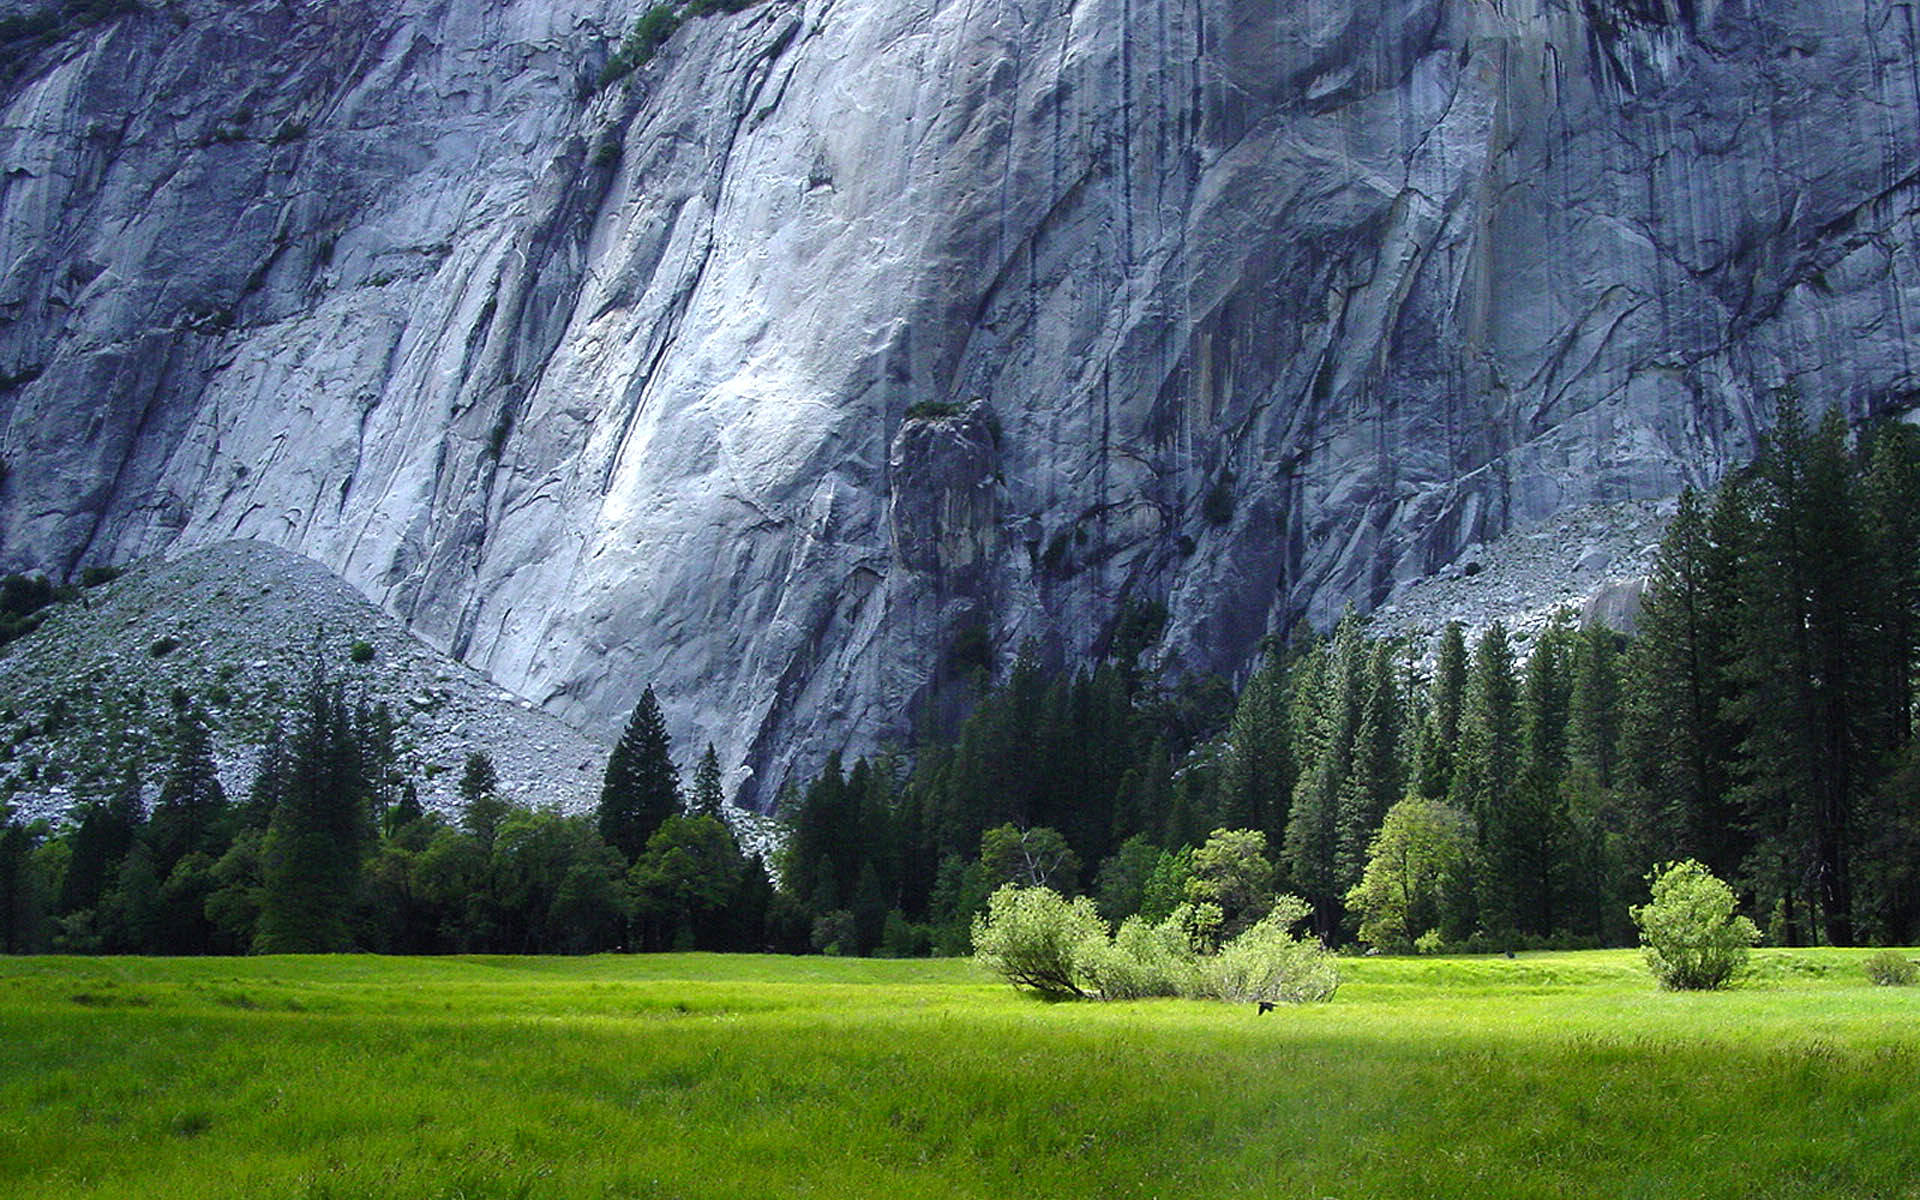 Rock Face Yosemite Best Background Full HD1920x1080p, 1280x720p, - HD Wallpapers Backgrounds Desktop, iphone & Android Free Download